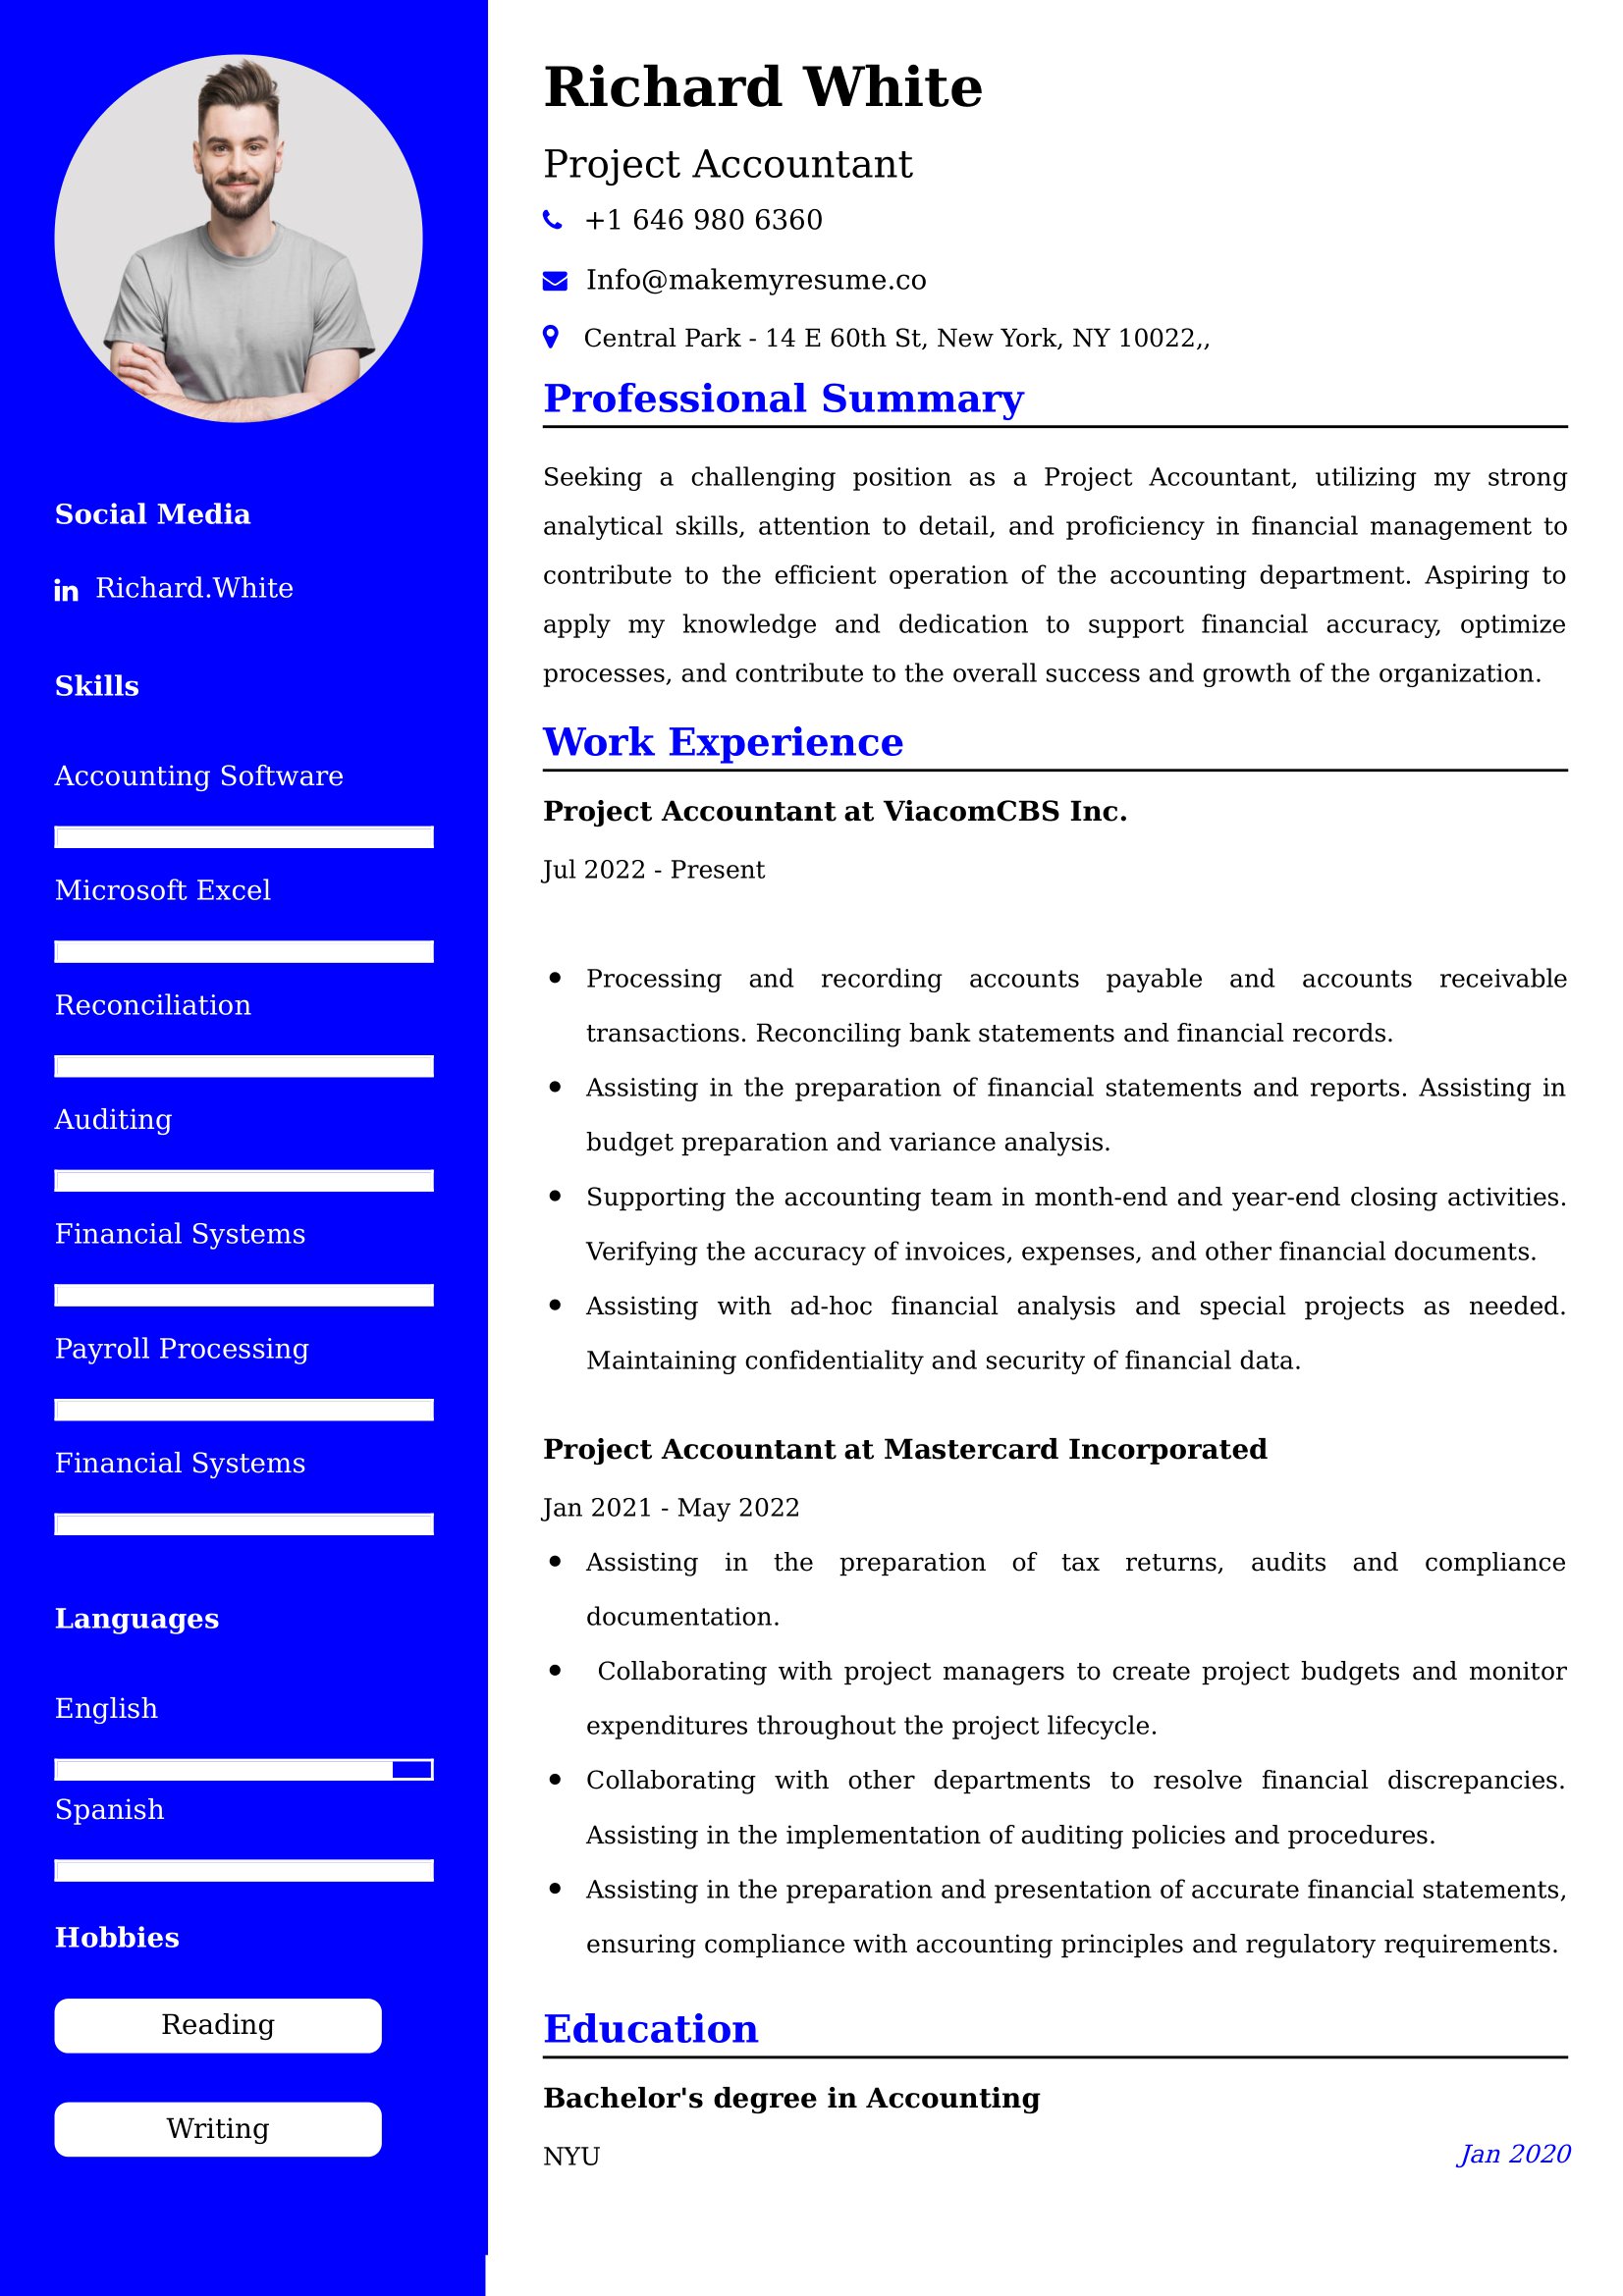 Project Accountant Resume Examples - Australian Format and Tips